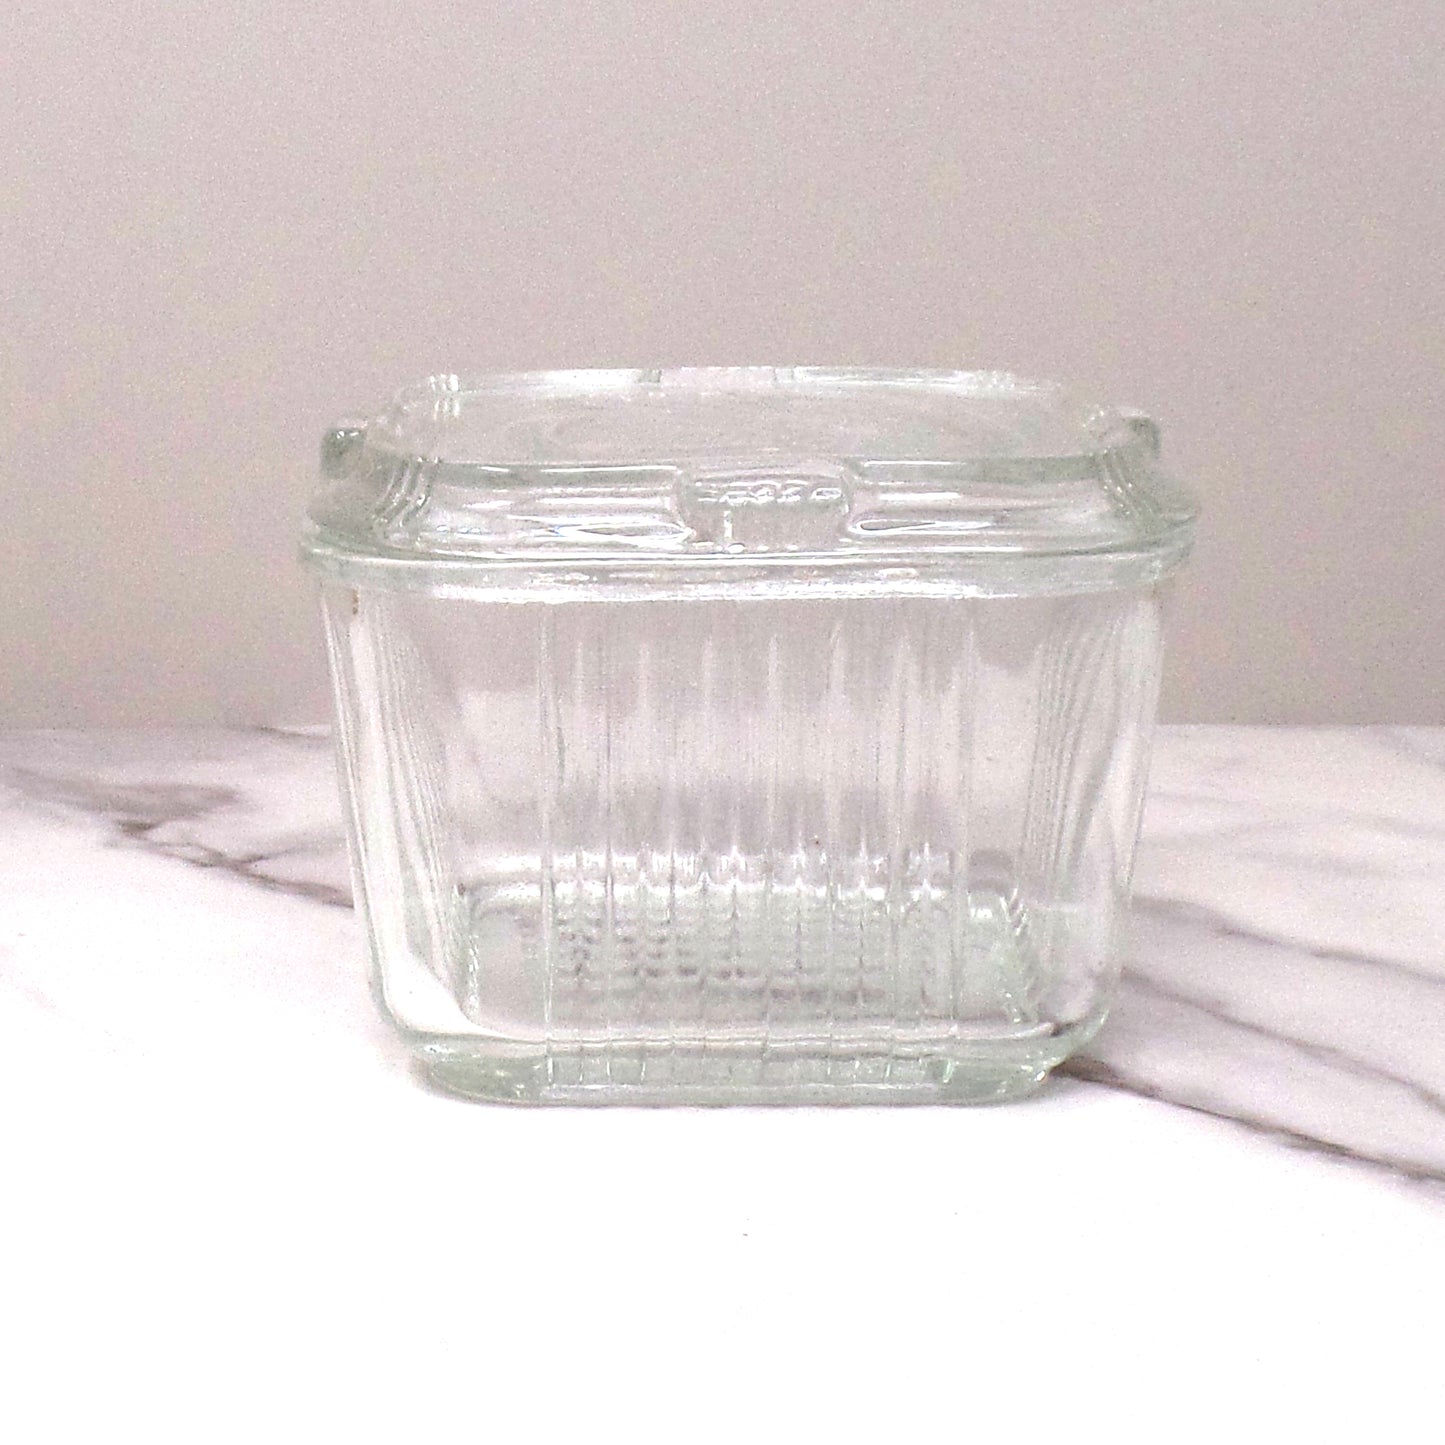 Vintage Federal Glass Refrigerator Dish - Ribbed Sides with Vegetables on Lid (1950s)